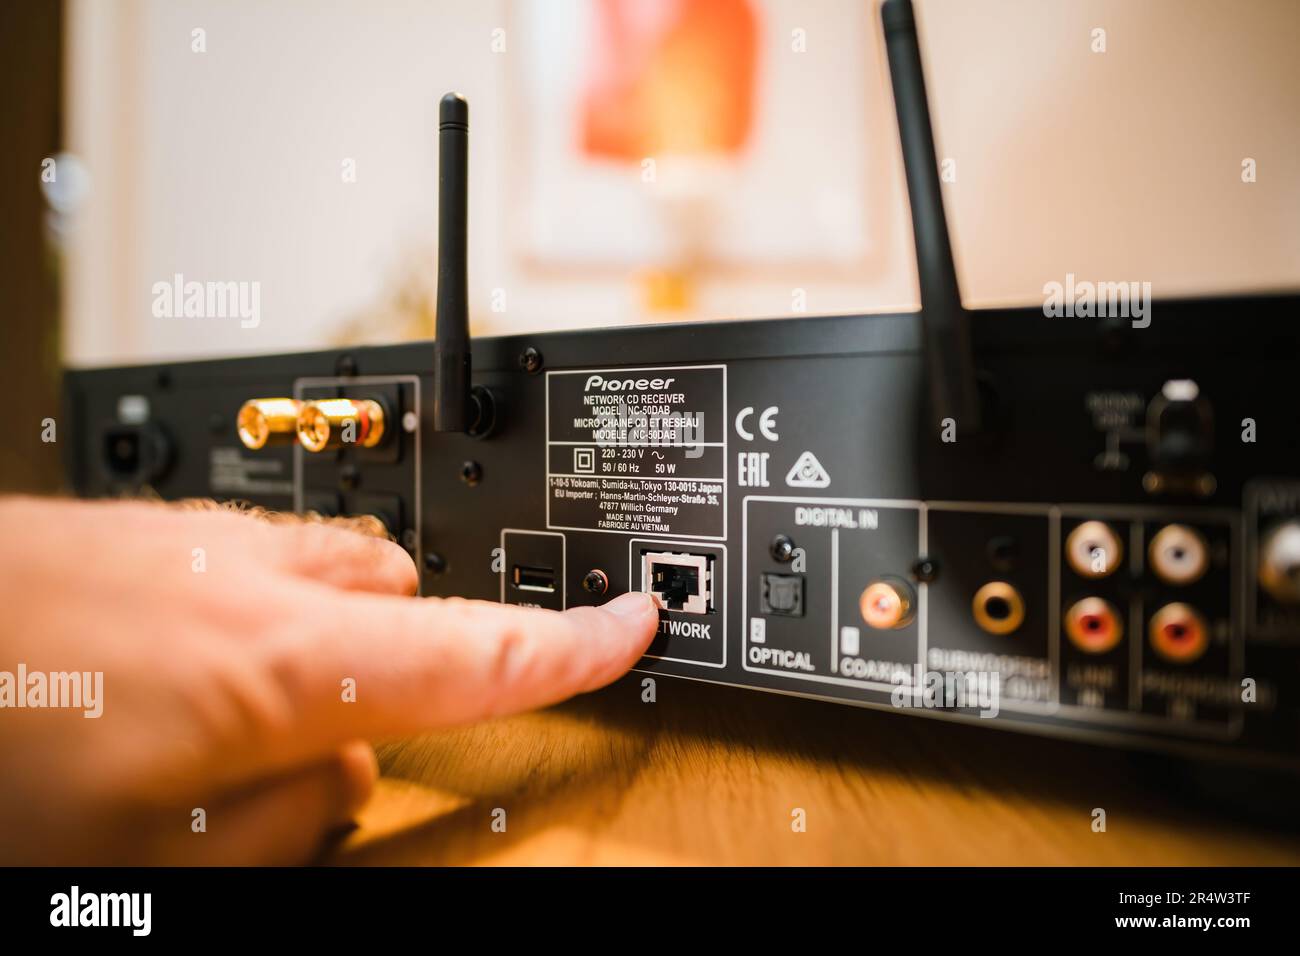 Frankfurt, Germany - Jan 30, 2023: Unboxing the Pioneer NC-50DAB Network CD Receiver, one person is indoors connecting it to technology via a RJ-45 ne Stock Photo